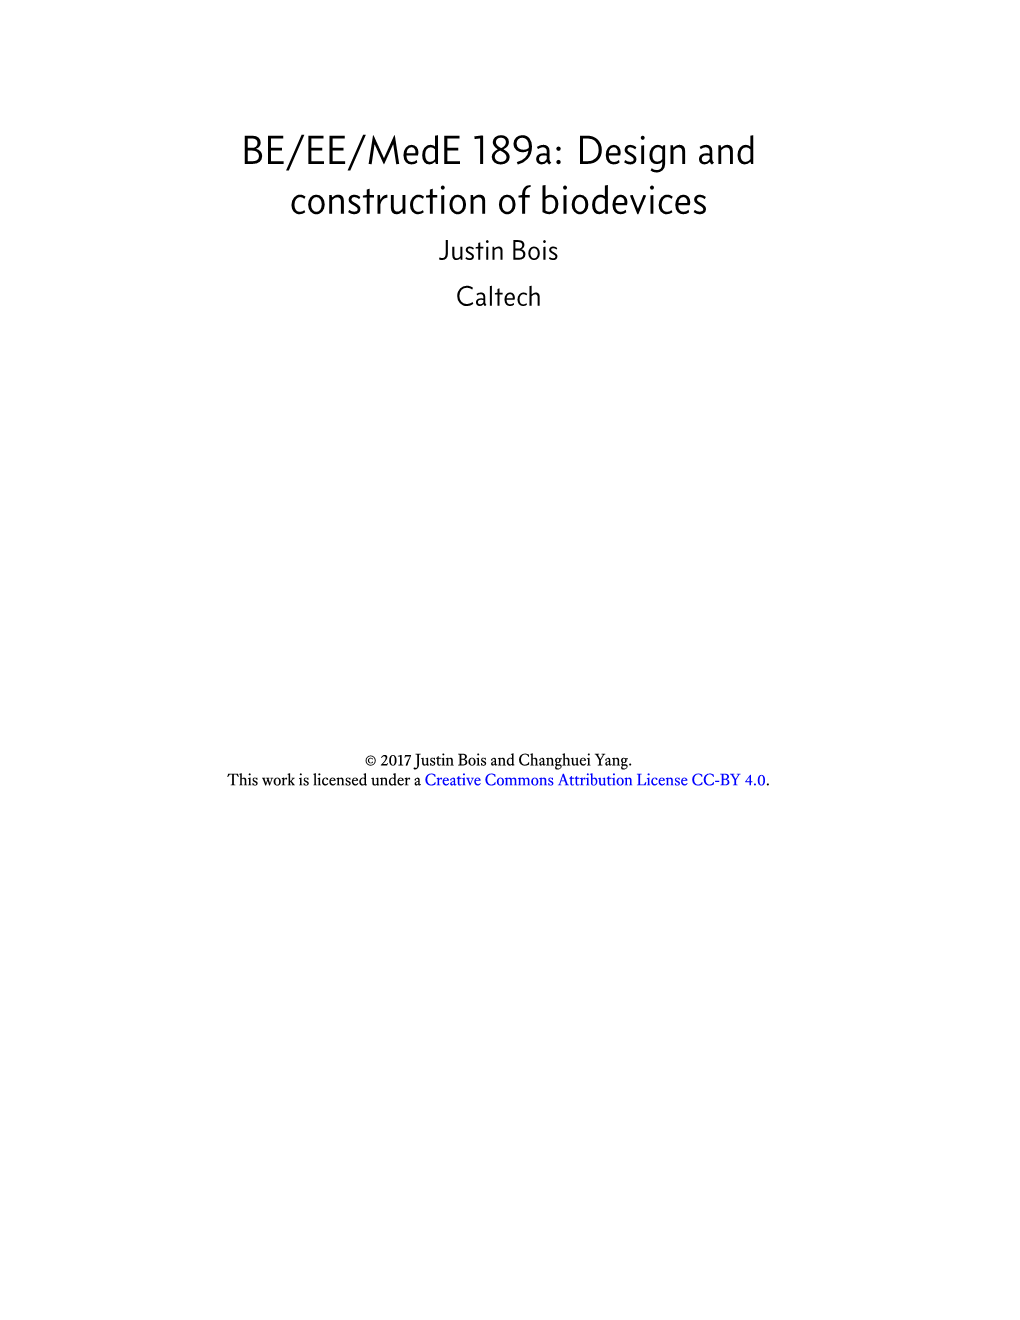 BE/EE/Mede 189A: Design and Construction of Biodevices Justin Bois Caltech